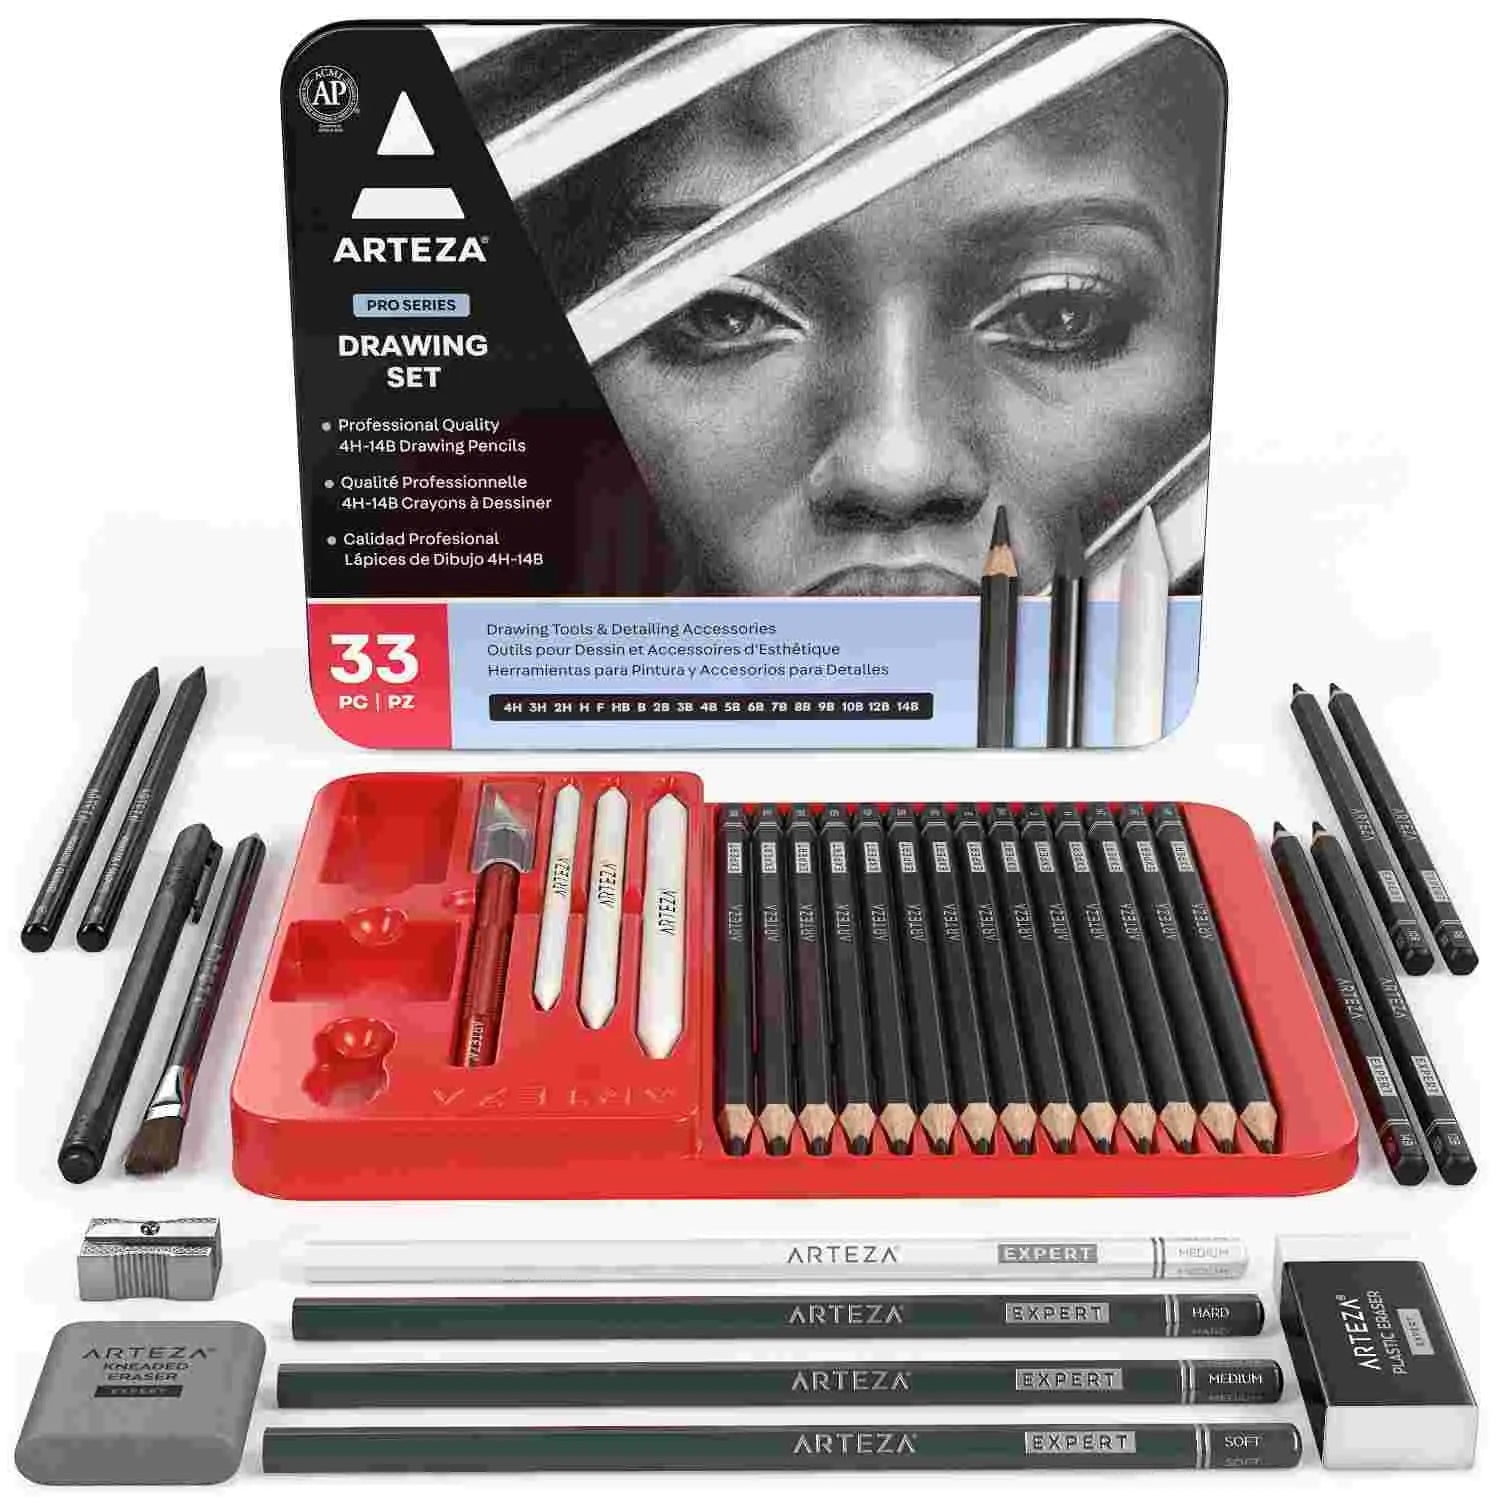 Arteza Drawing Set for Adults, Set of 33 Artist Sketching Tools, 20 Graphite & 4 Charcoal Sketch Pencils, 1 Fineliner, 3 Blenders, 1 Sharpener, 3 Erasers & 1 Hobby Knife, Art Supplies for Drawing Arteza